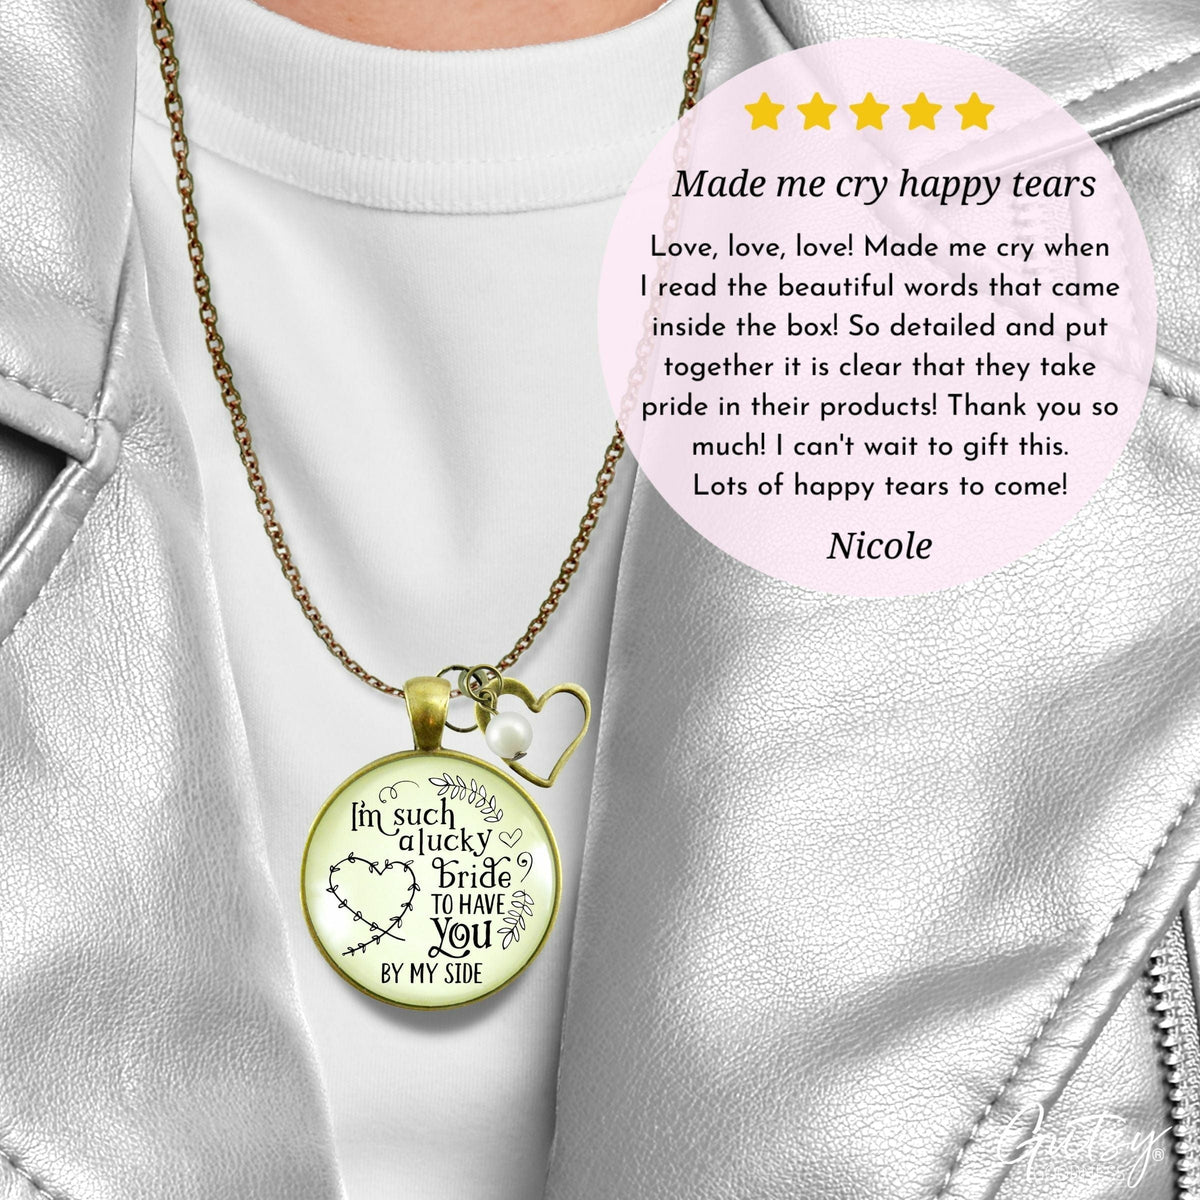 Gutsy Goodness Bridesmaid Necklace I'm Lucky Bride Wedding Bachelorette Party Gift - Gutsy Goodness Handmade Jewelry;Bridesmaid Necklace I'm Lucky Bride Wedding Bachelorette Party Gift - Gutsy Goodness Handmade Jewelry Gifts